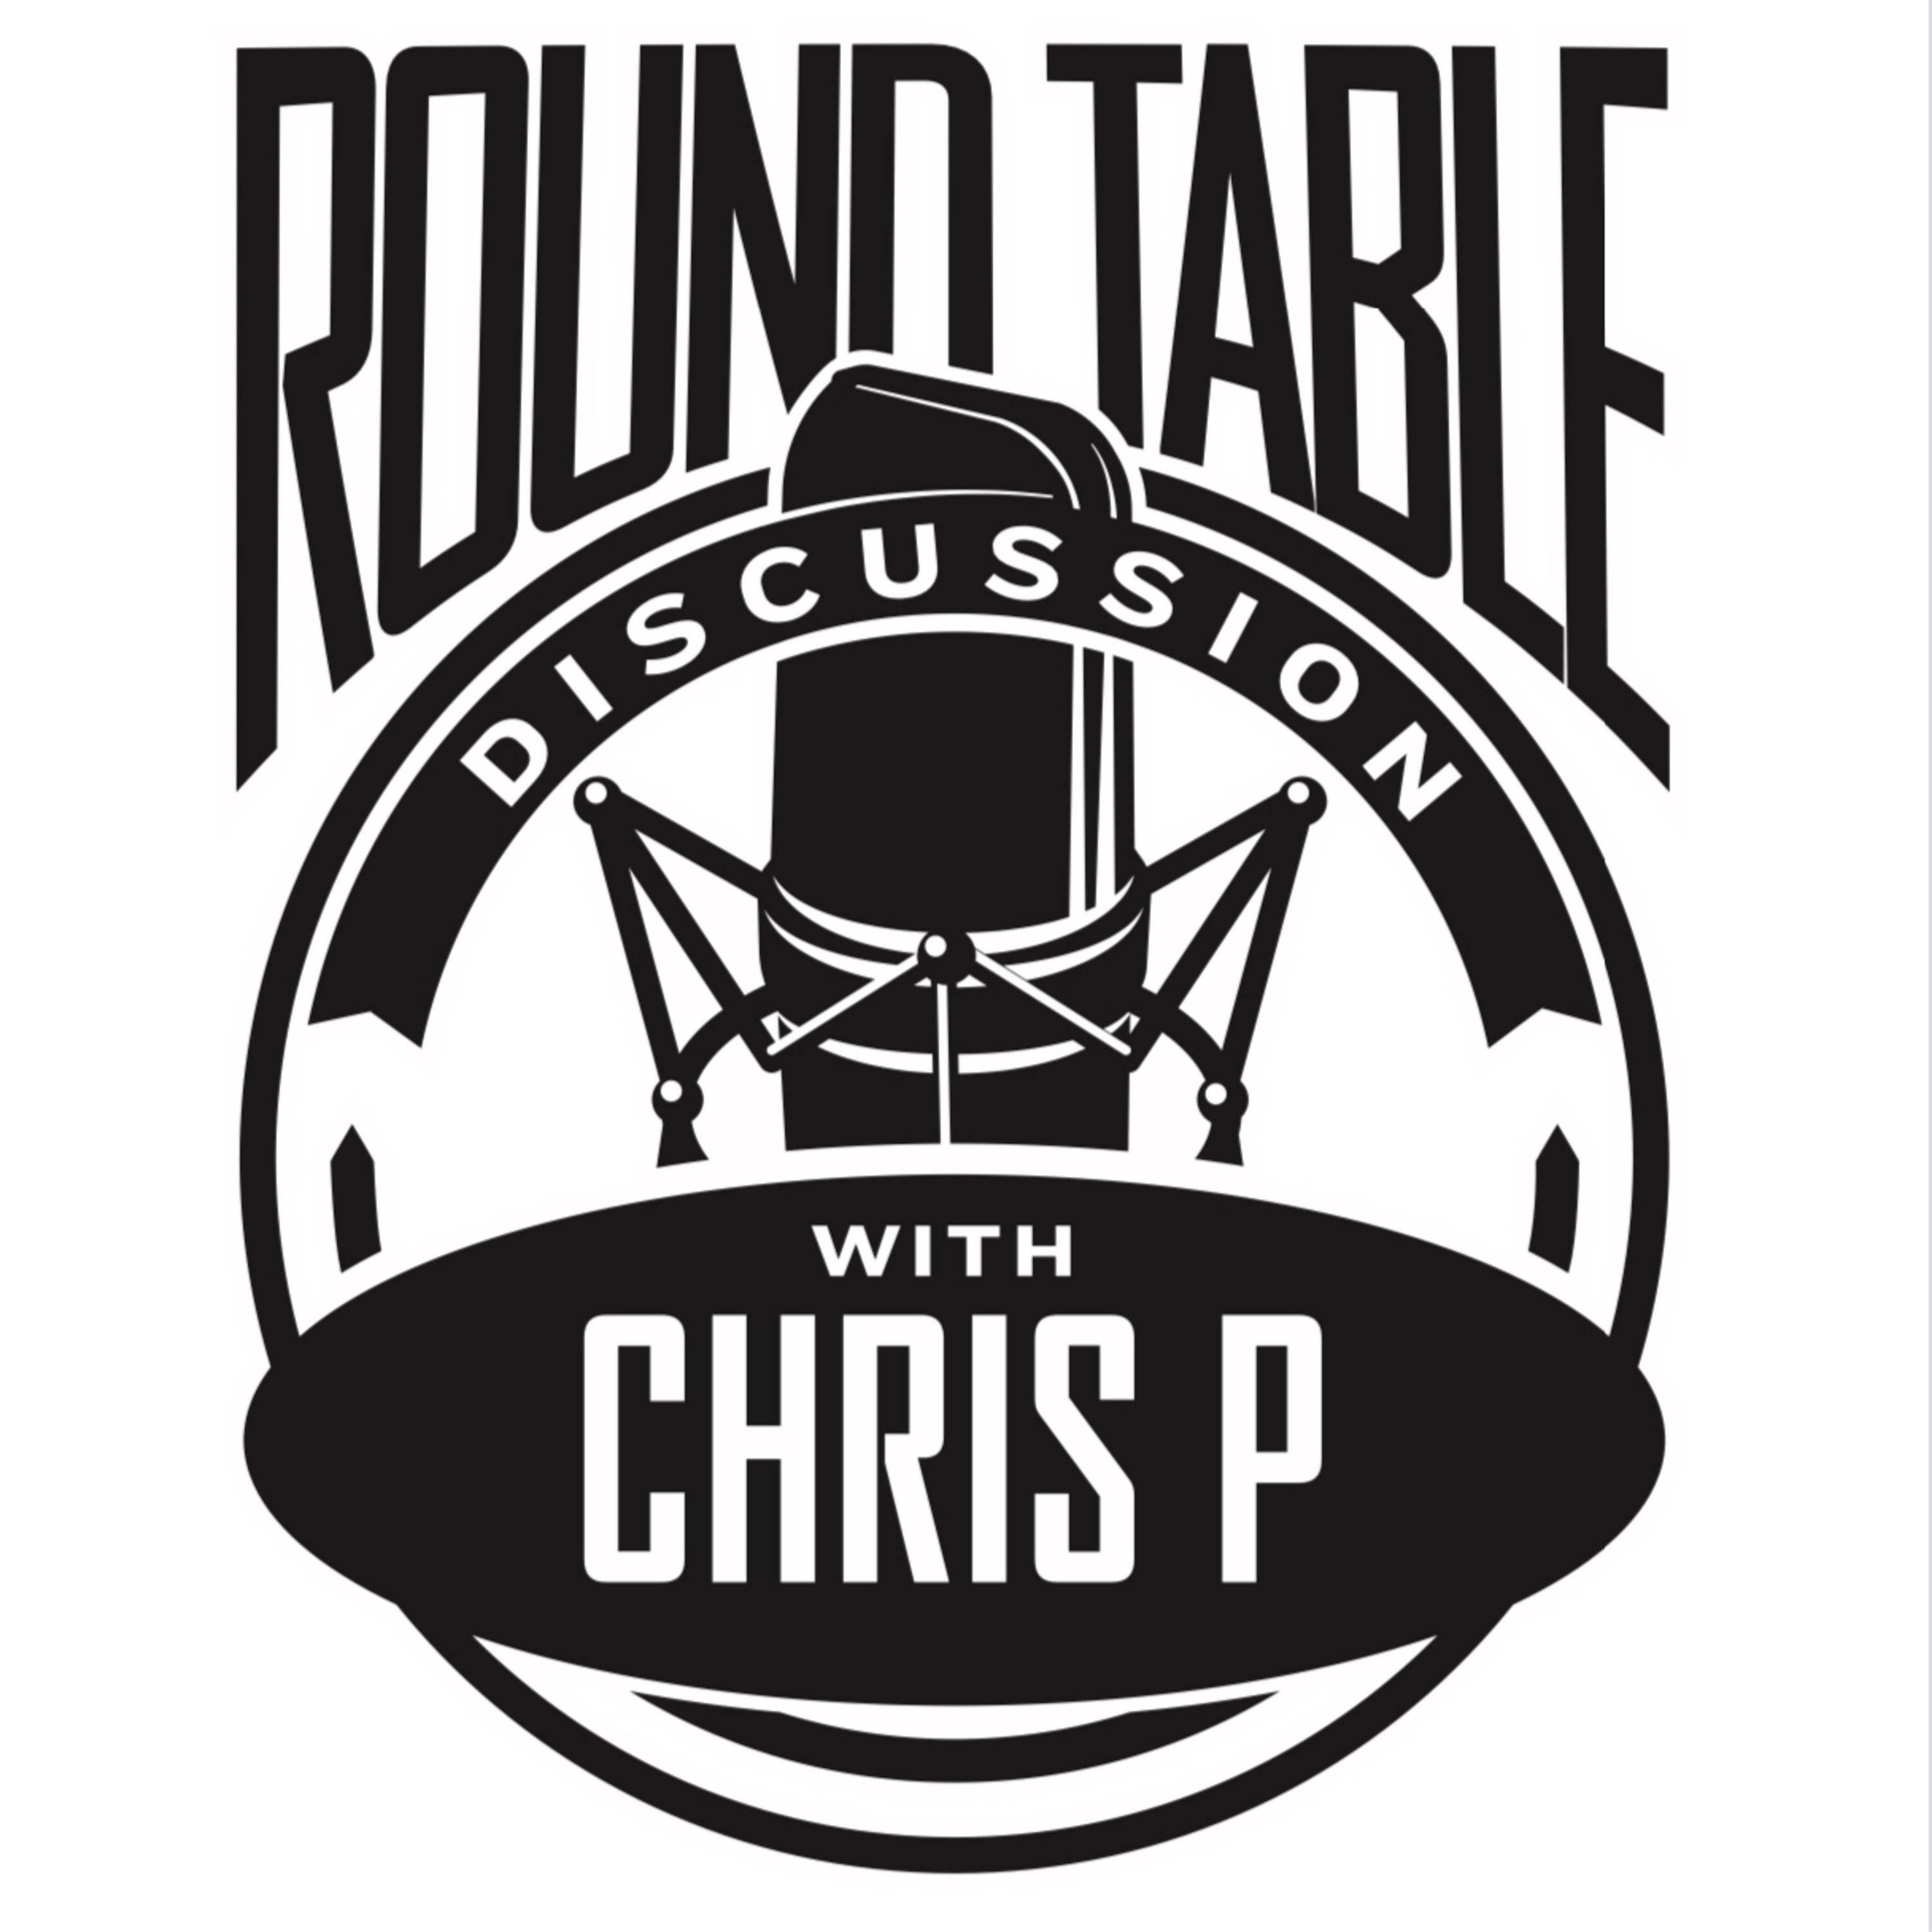 Round Table Discussion Podcast with Chris P.